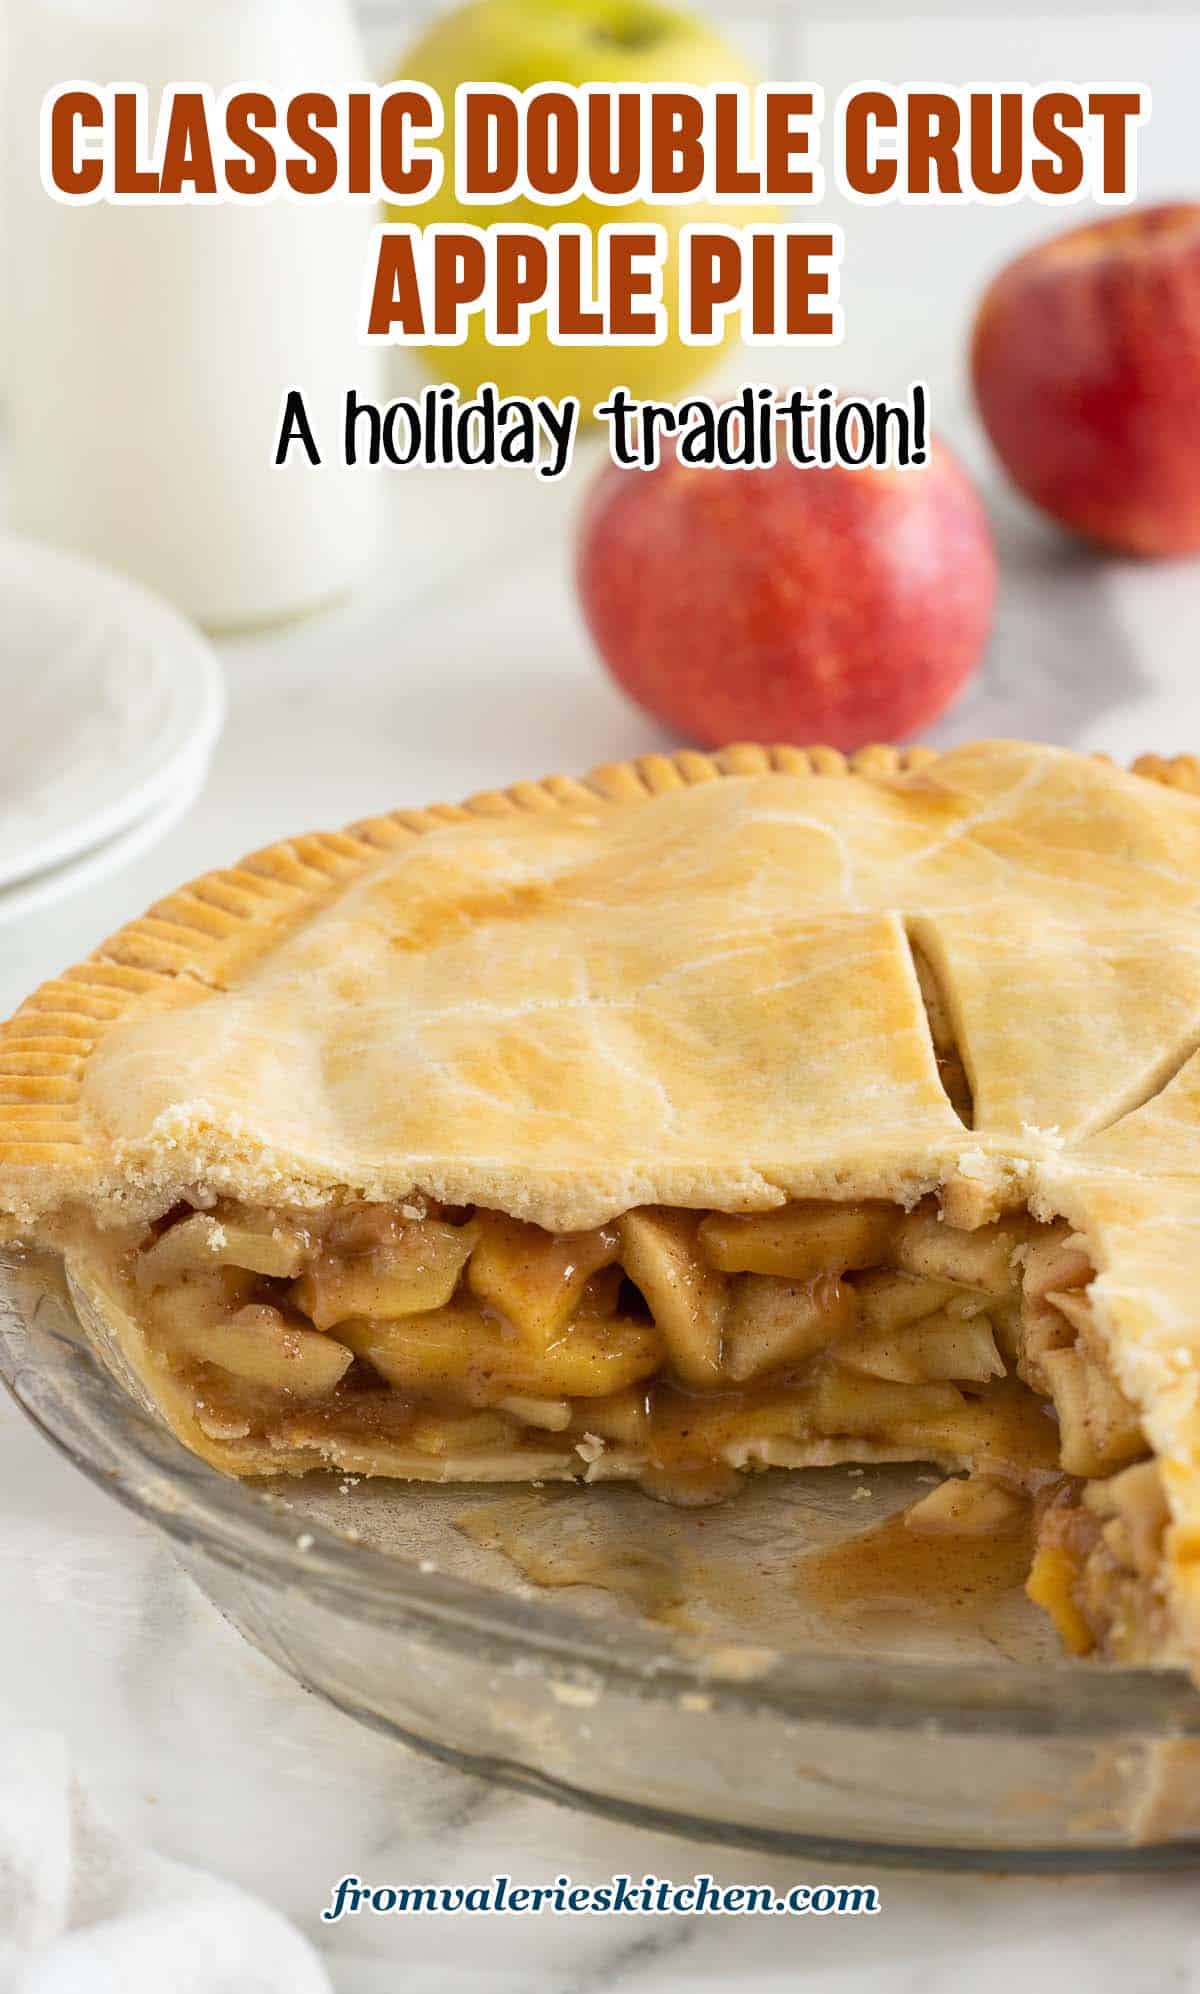 A side view of a sliced apple pie revealing the apple pie filling with text.